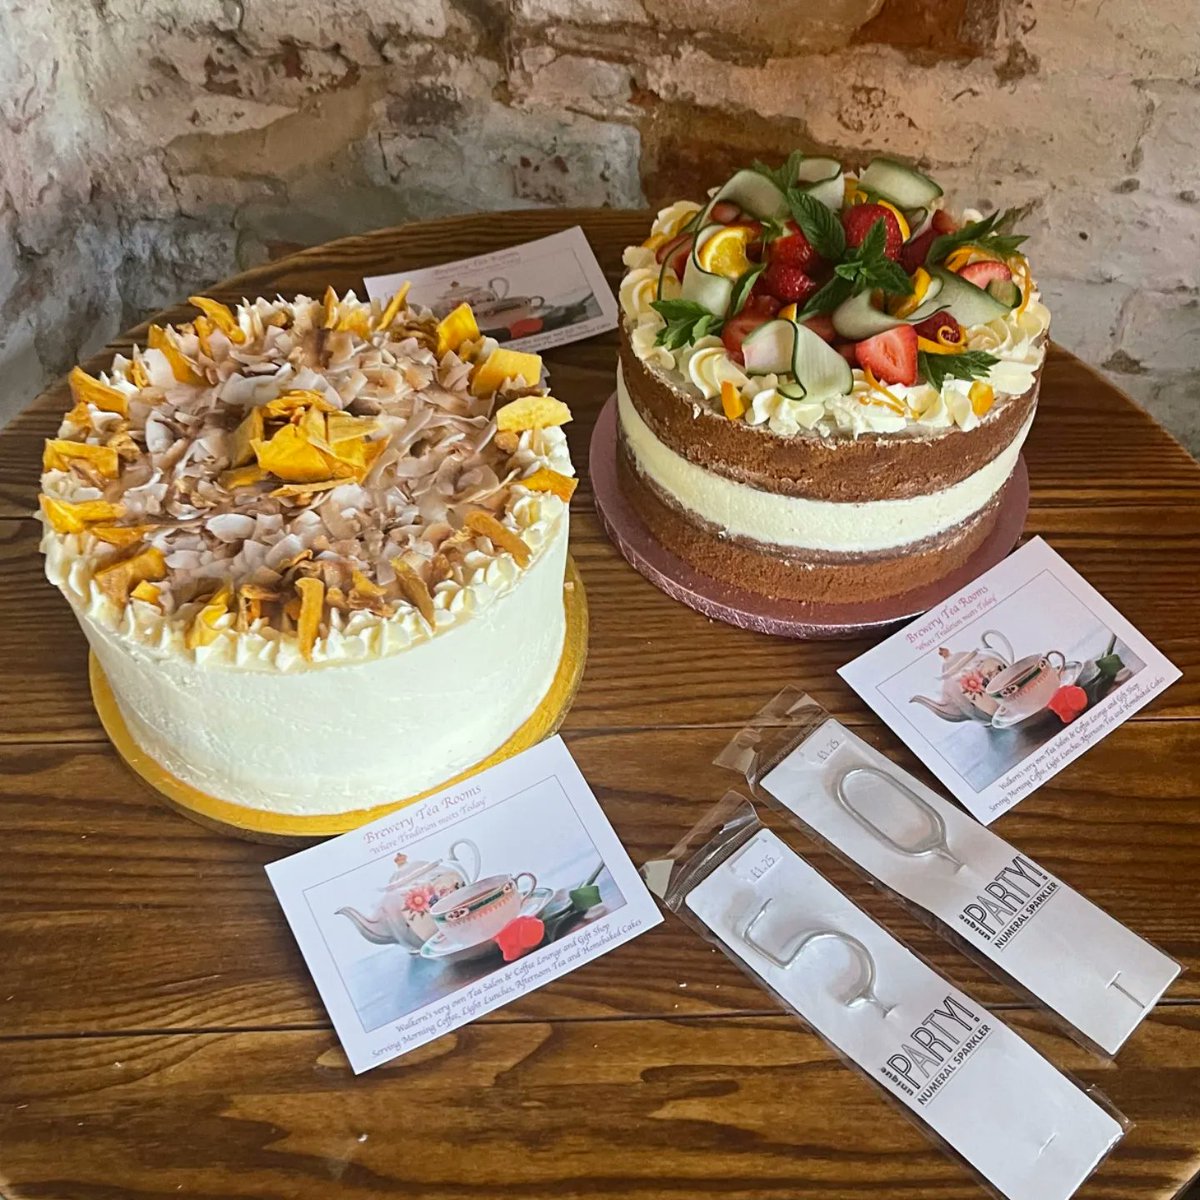 Huge thank you to @brewerytearooms for the amazing cakes for my 50th party. One Pimms & one Pina Colada. Absolutely beautiful and extremely delicious 😋 Everyone loved them. 😍 #cakes #Hertfordshire #celebration #birthday